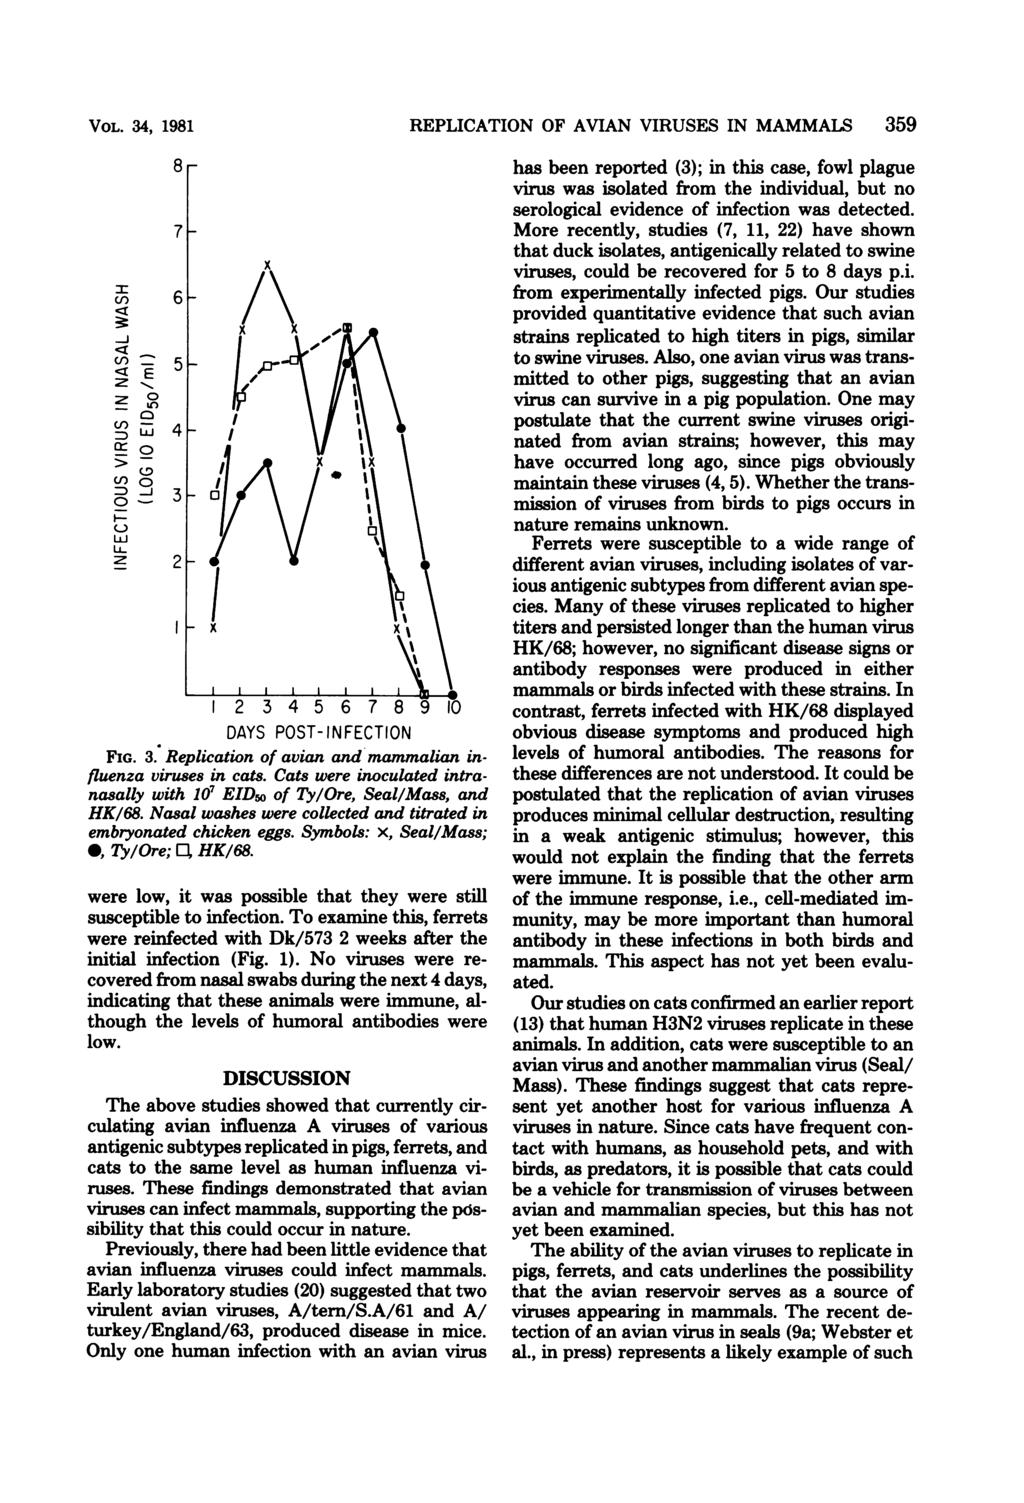 ~~0 8 7 z1 6 0 VOL. 34, 1981 zd -POST-I 0 M j 3-0 z 2-2 3 4 5 6 7 8 9 O DAYS POST-INFECTION FIG. 3. Replication of avian and mammalian influenza viruses in cats.